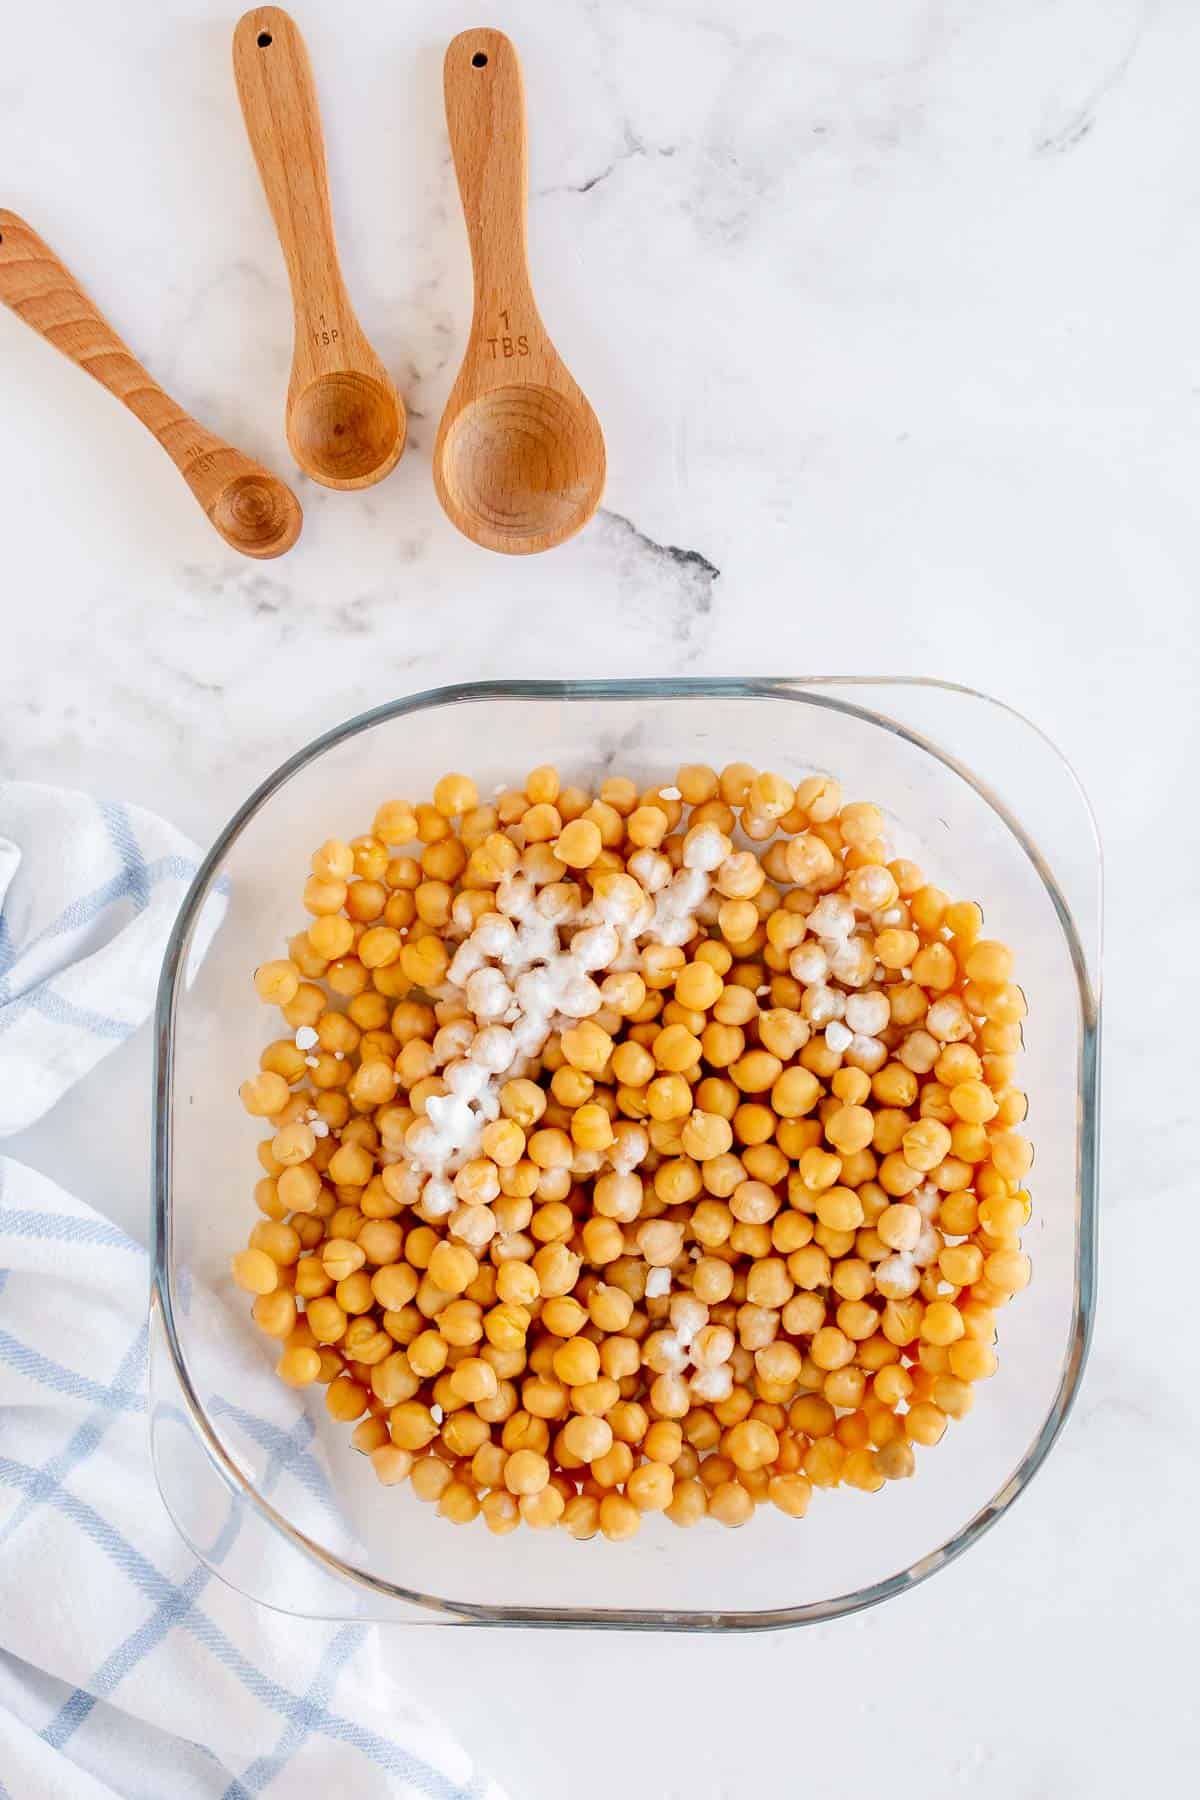 chick peas in a bowl with baking soda